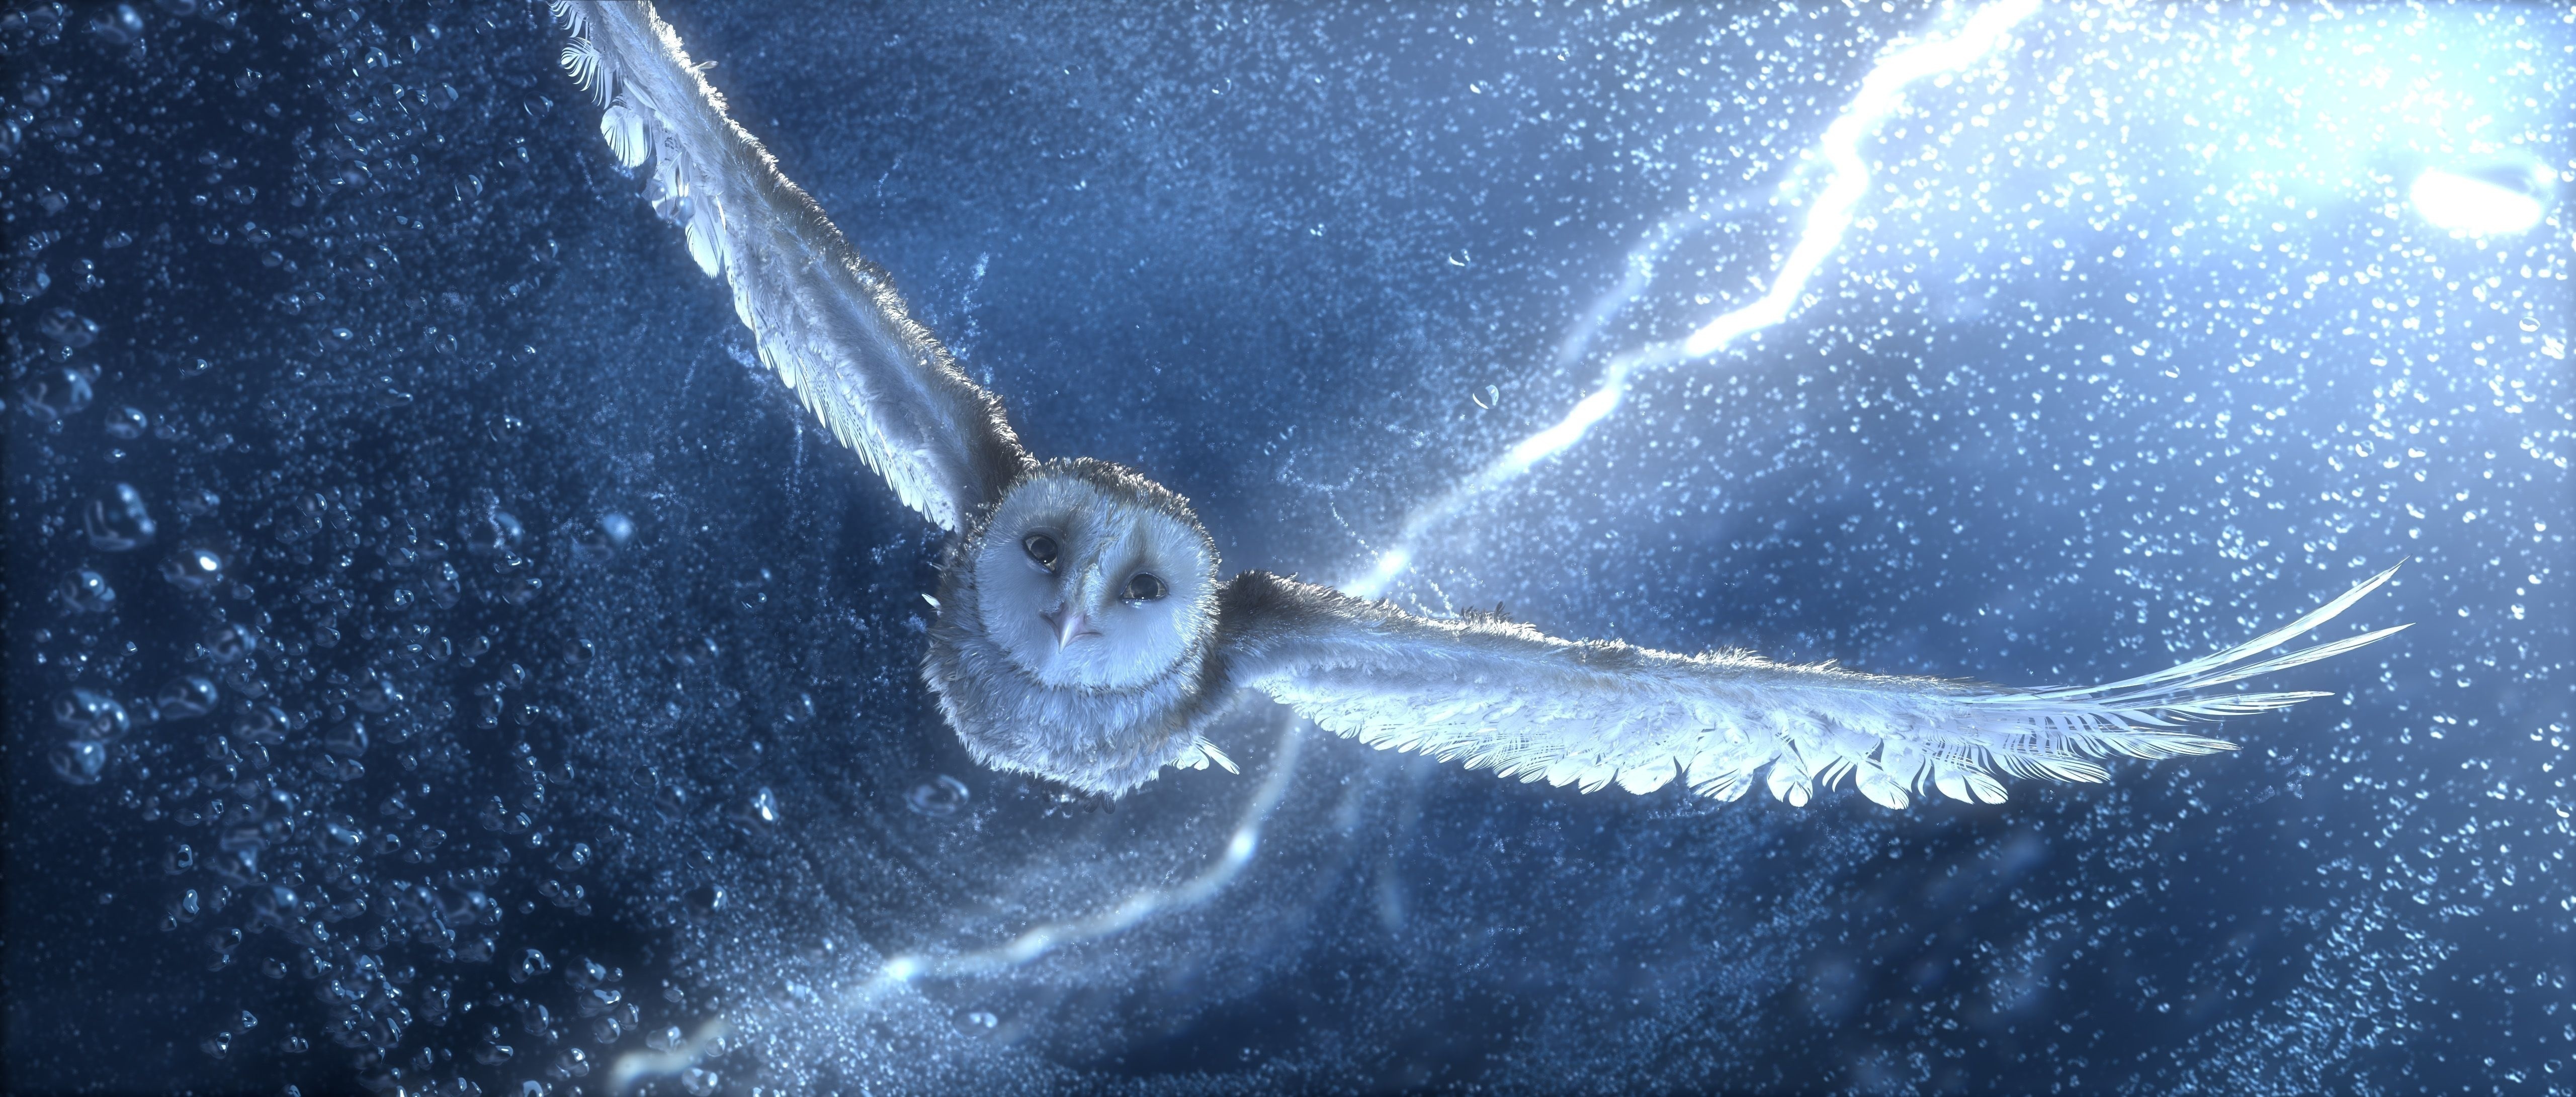 Owl 4k Ultra HD Wallpaper and Background  5122x2182  ID 